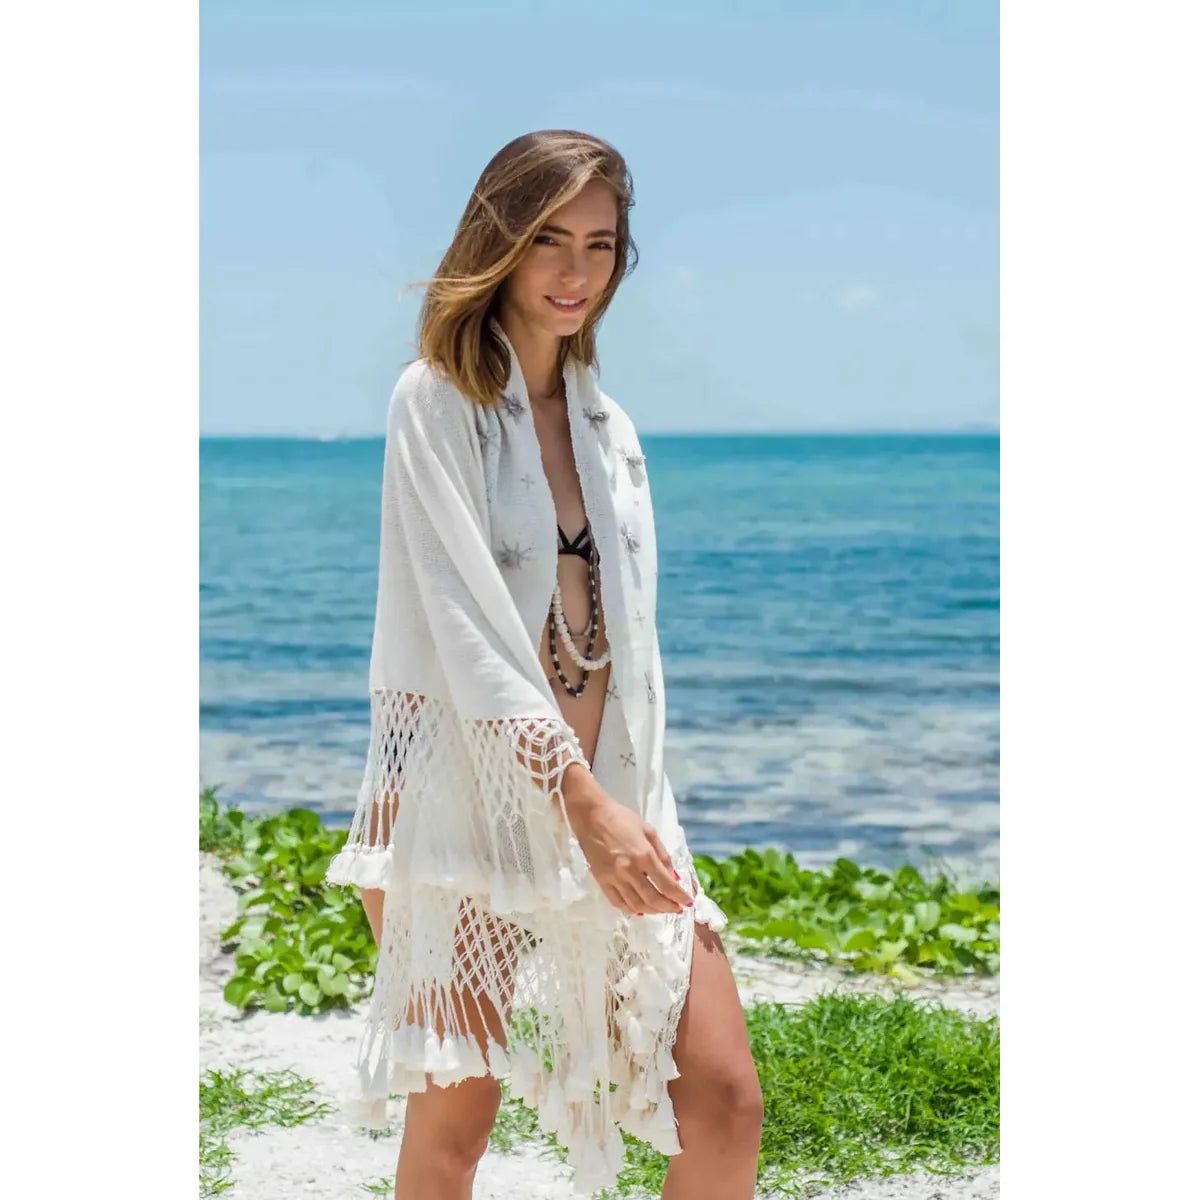 Spring Time-Out: What to Wear for this Spring Break